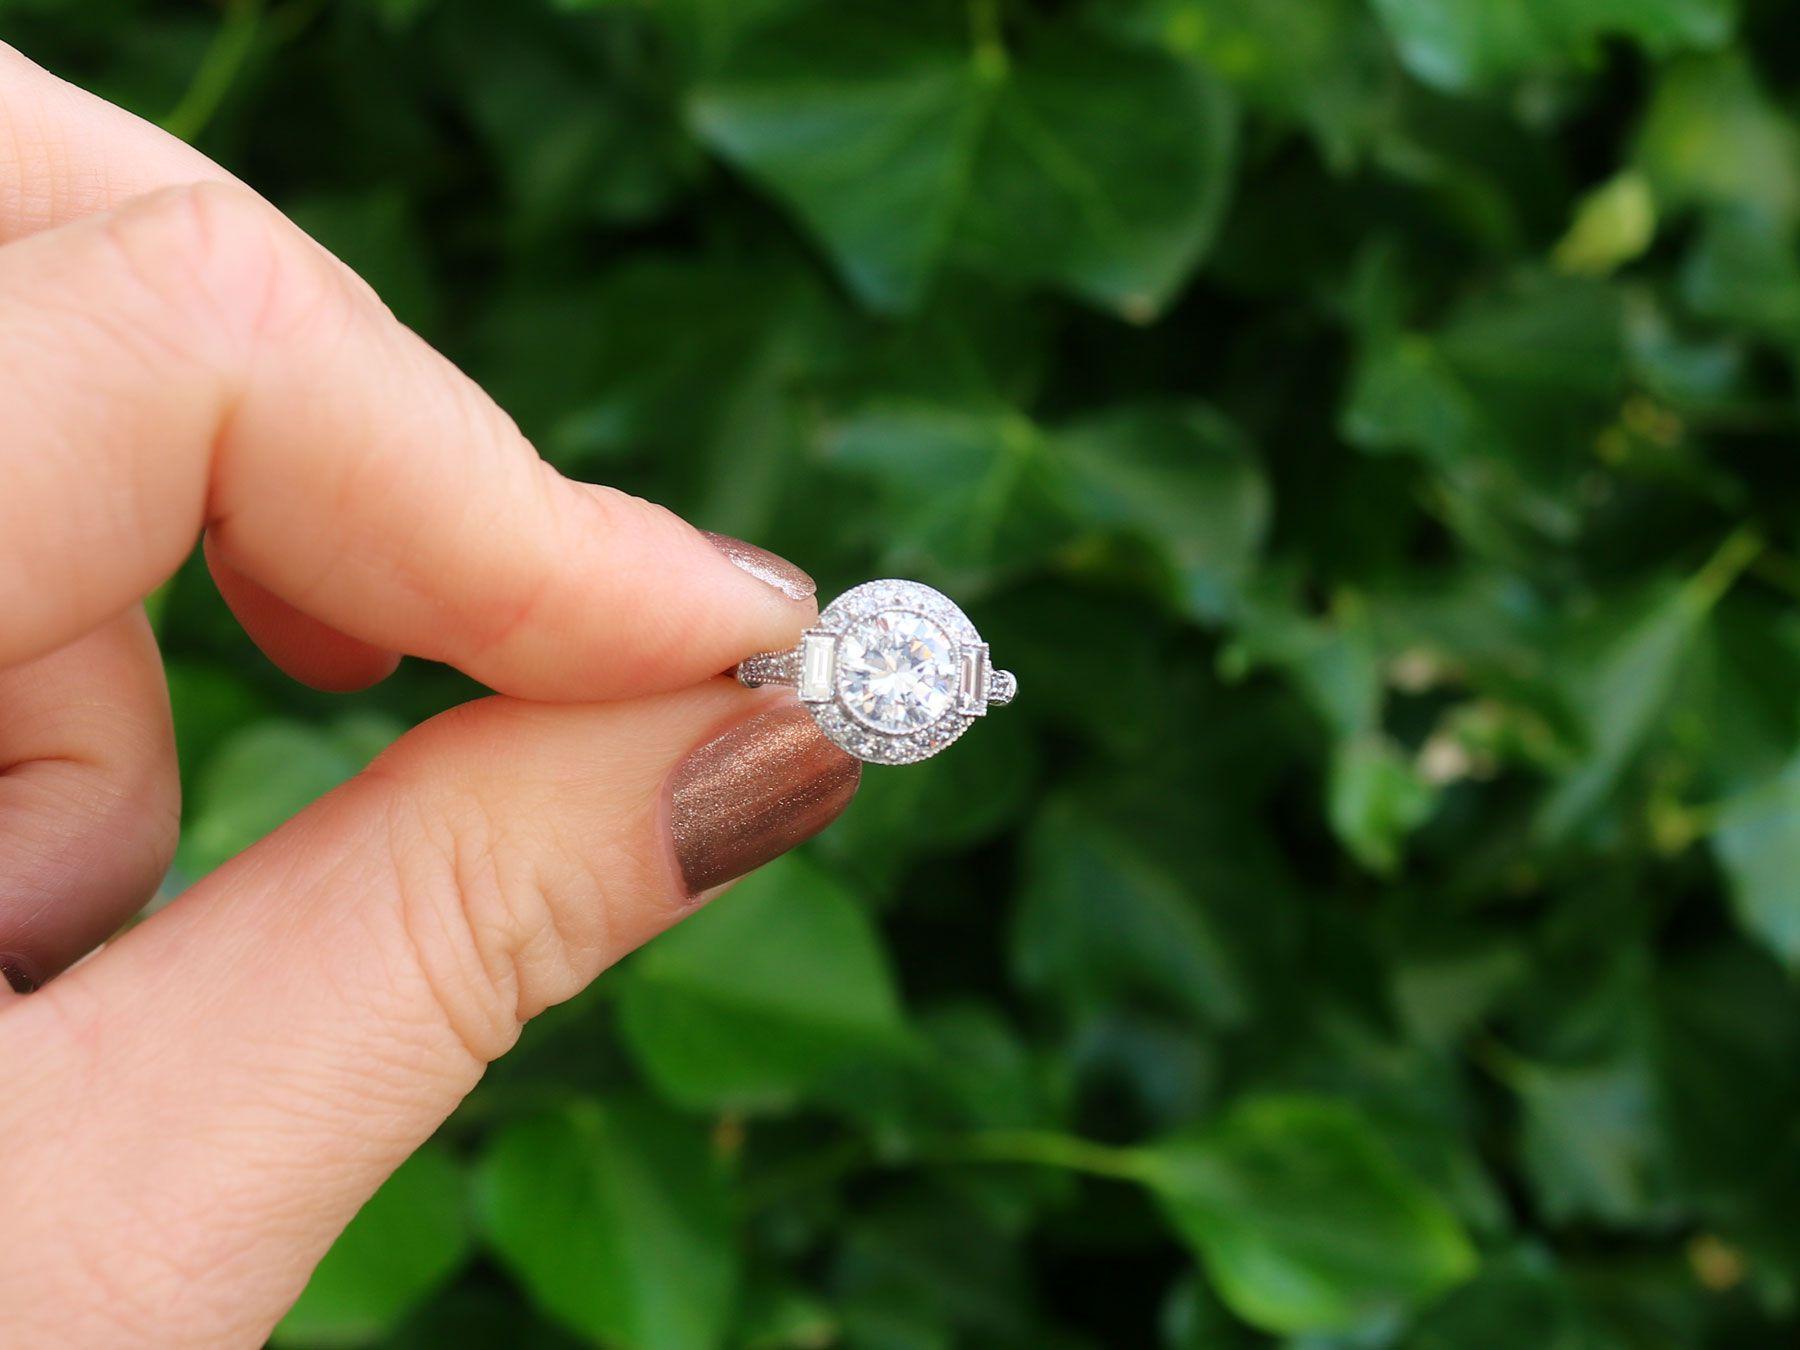 A stunning antique and contemporary 1.82 Ct diamond and platinum halo style halo ring; part of our diverse diamond jewelry and estate jewelry collections.

This stunning, fine and impressive diamond halo ring has been crafted in platinum.

The